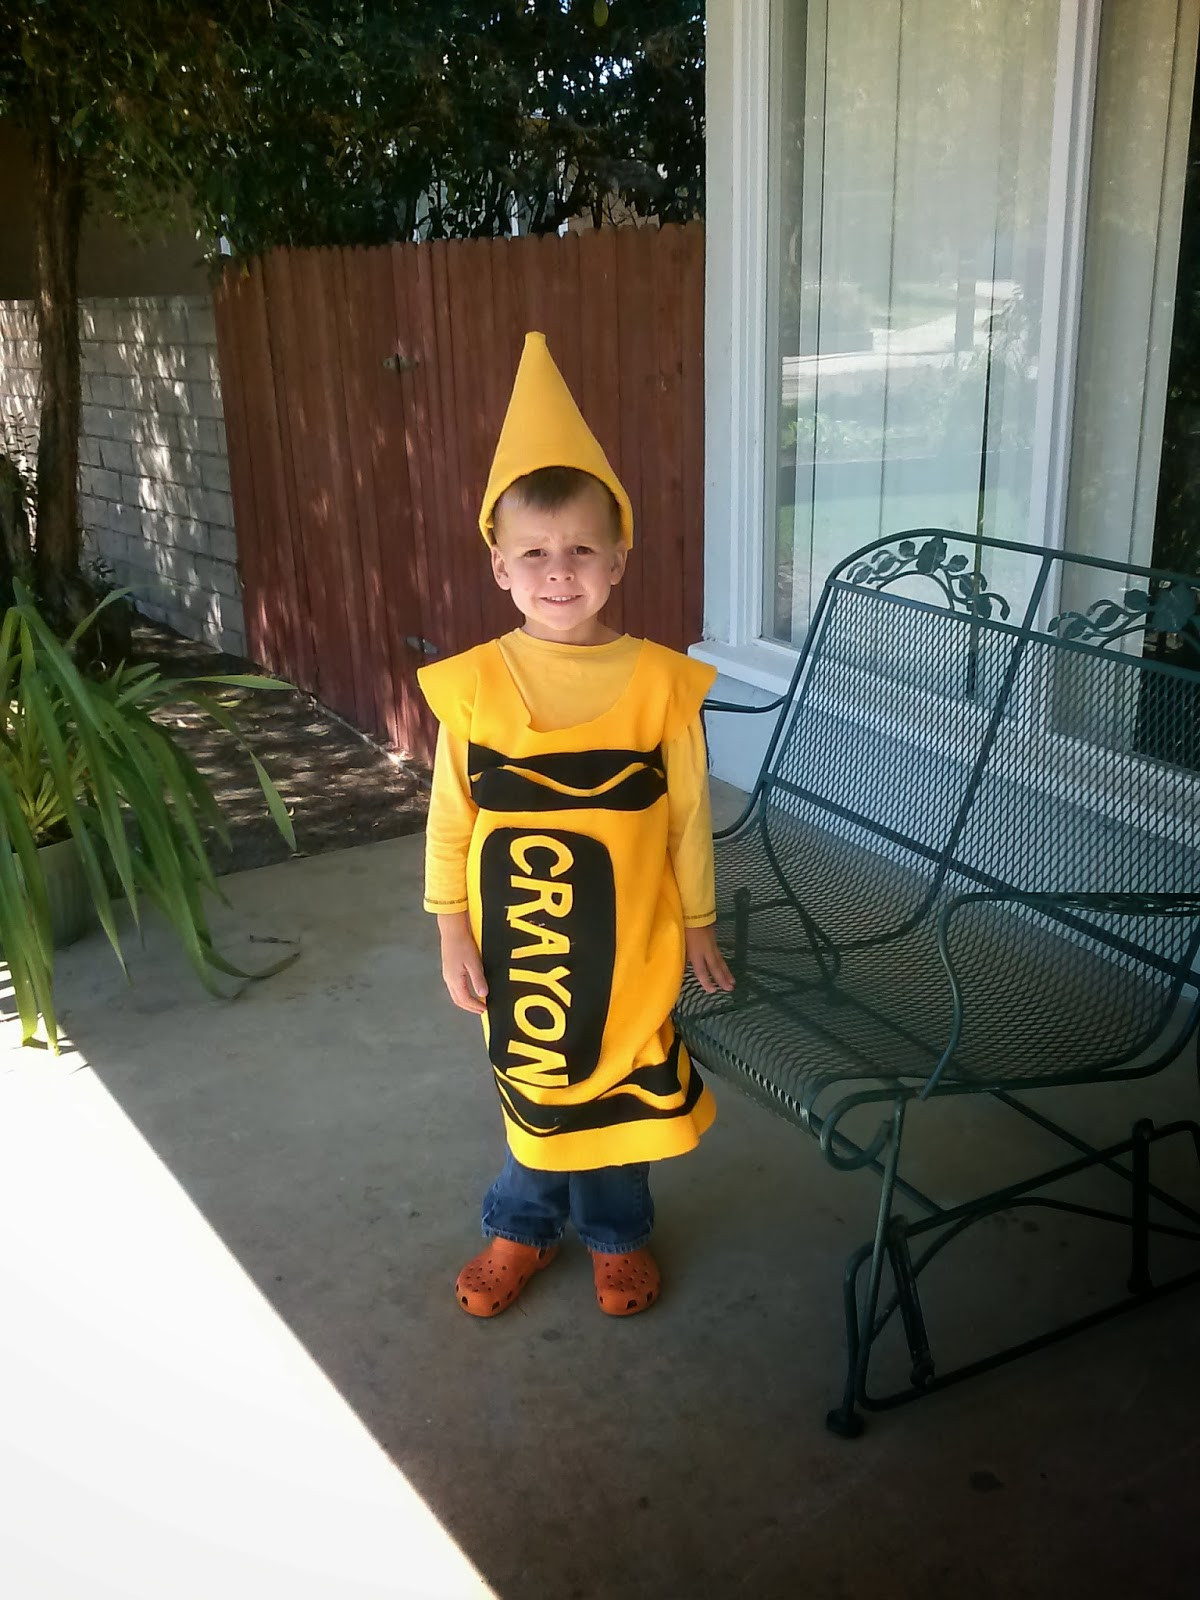 DIY Crayon Costumes
 Mommy Lessons 101 DIY Crayon Costume for less than $5